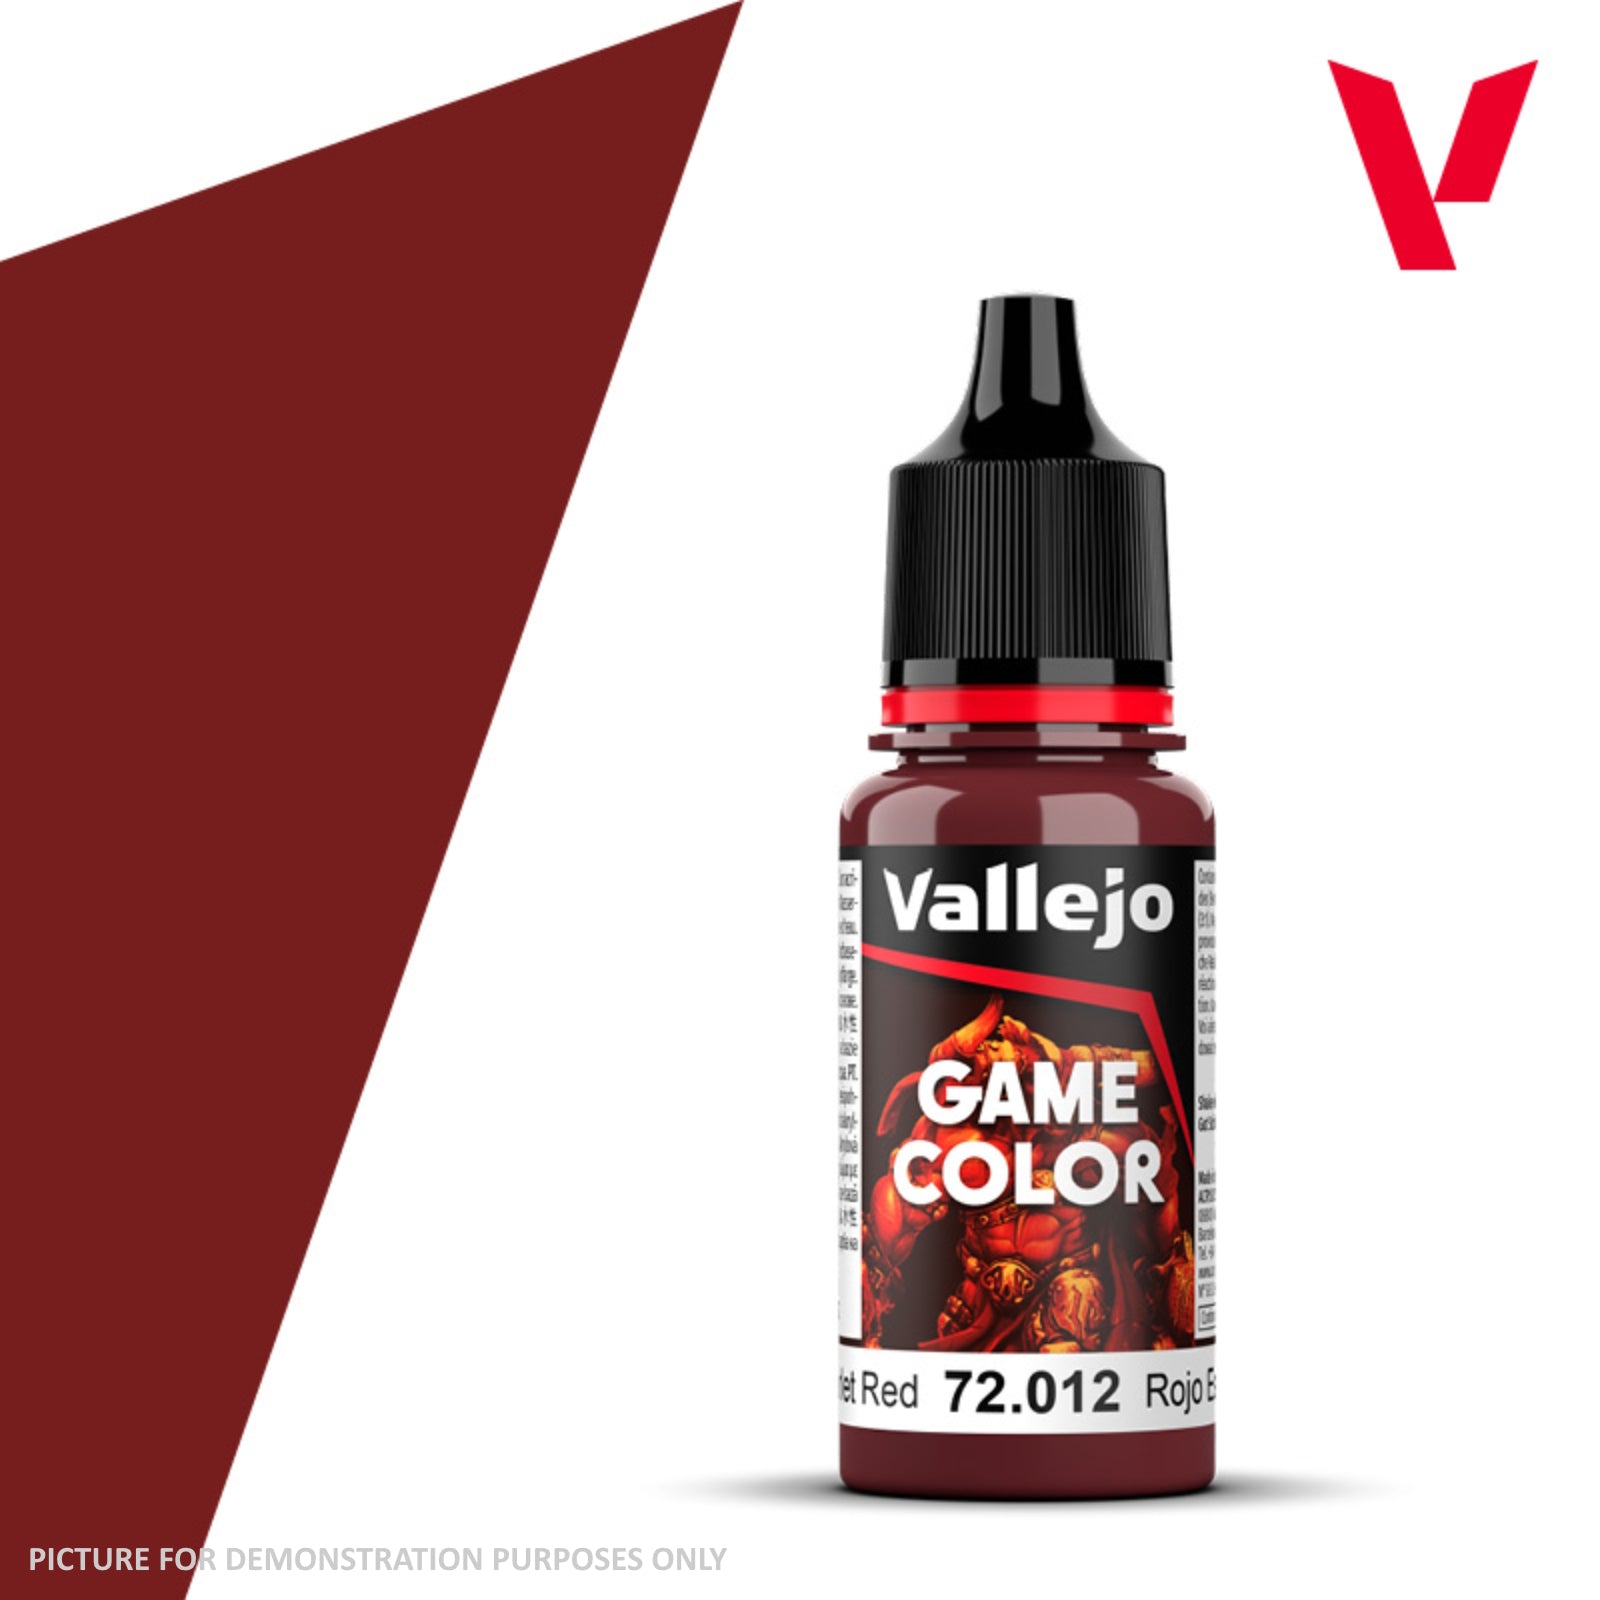 Vallejo Game Colour - 72.012 Scarlet Red 18ml